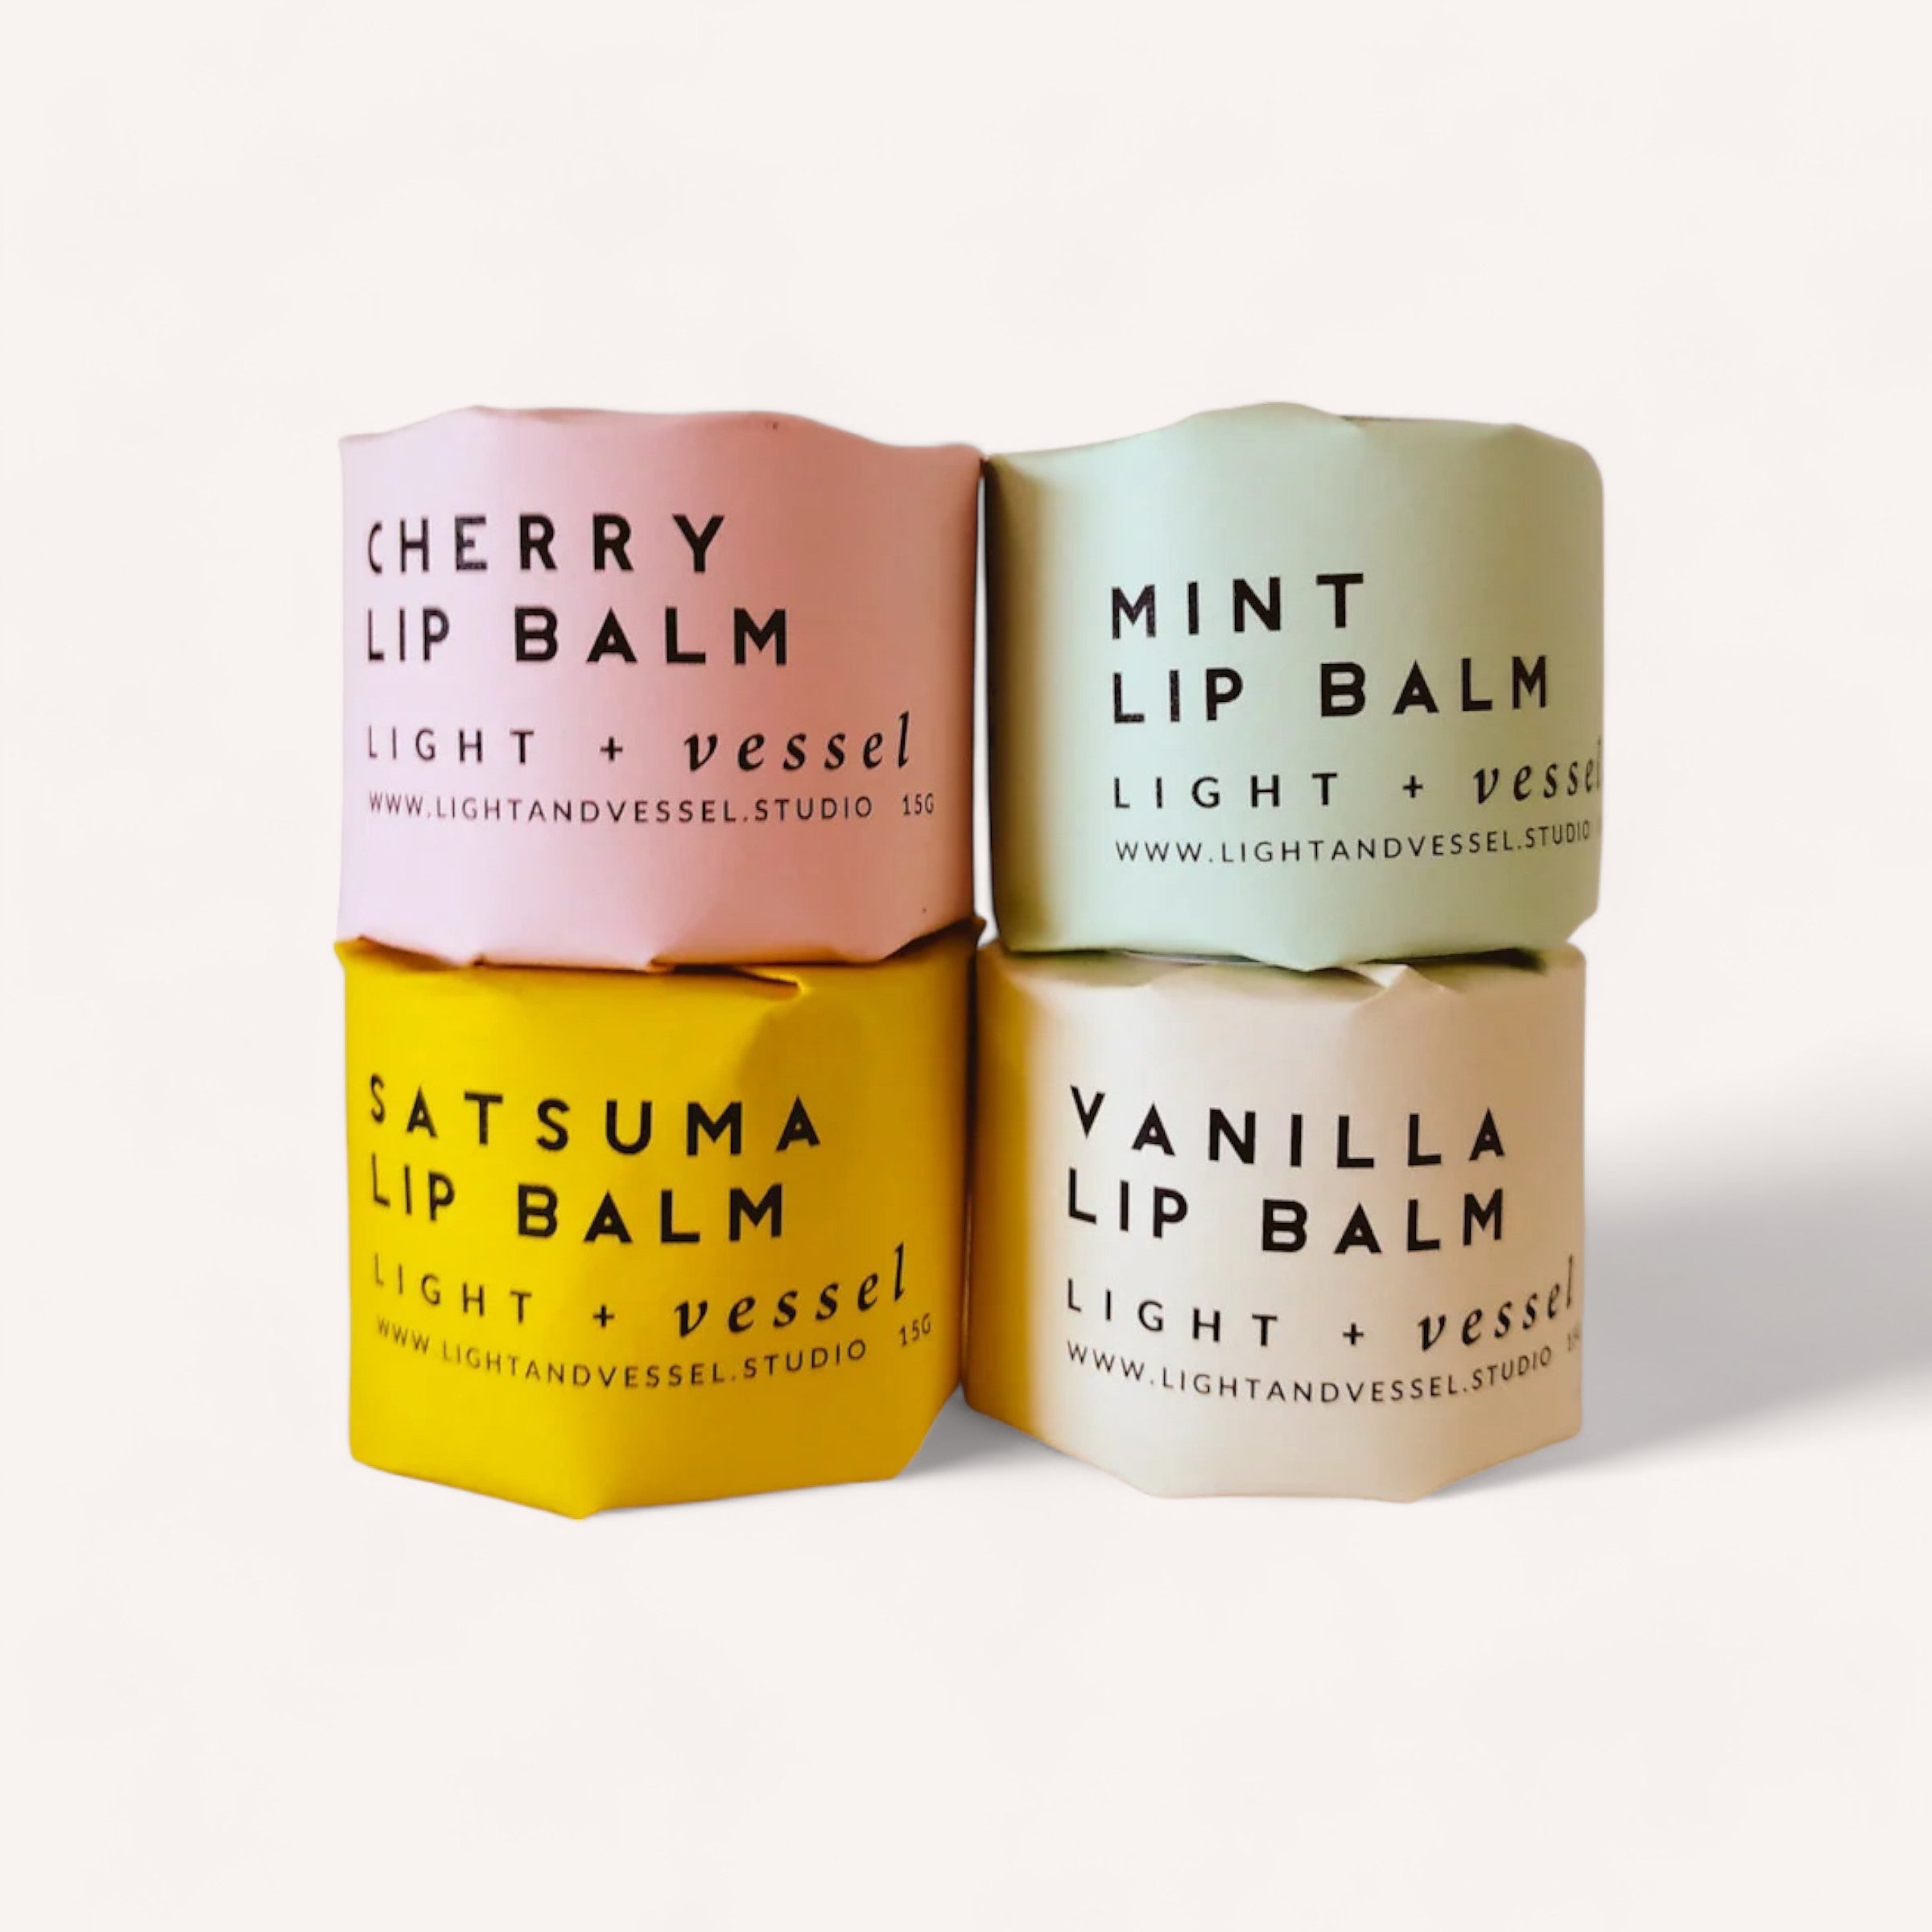 Four colorful Lip Balm by Light + Vessel containers in a row, each featuring a different organic flavour oil: cherry, mint, satsuma, and vanilla.